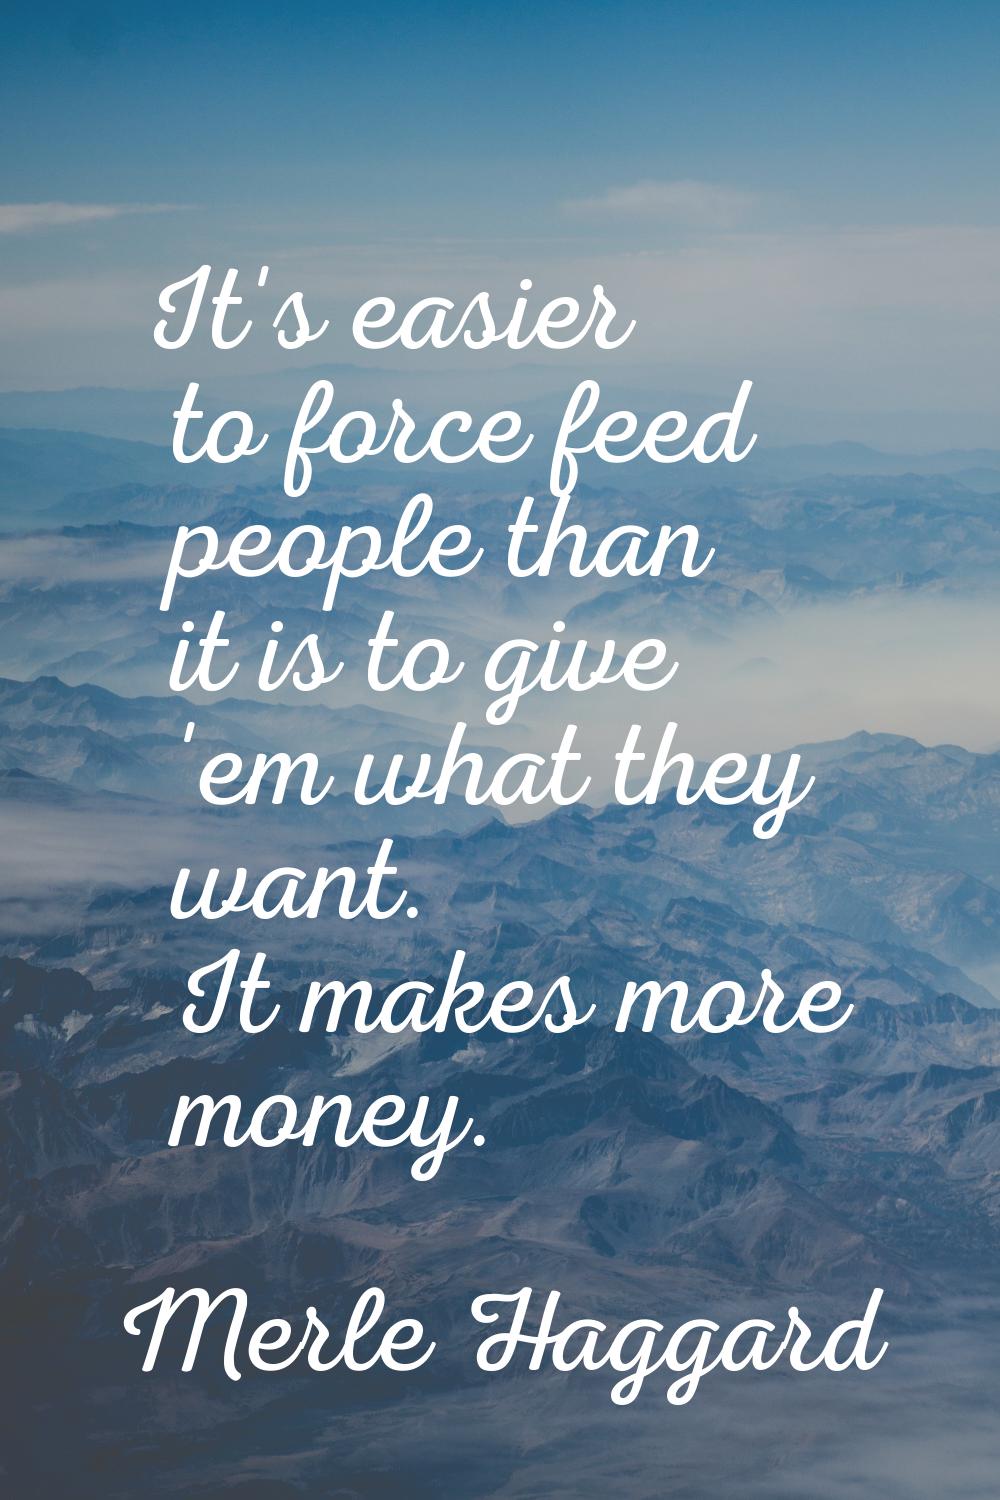 It's easier to force feed people than it is to give 'em what they want. It makes more money.